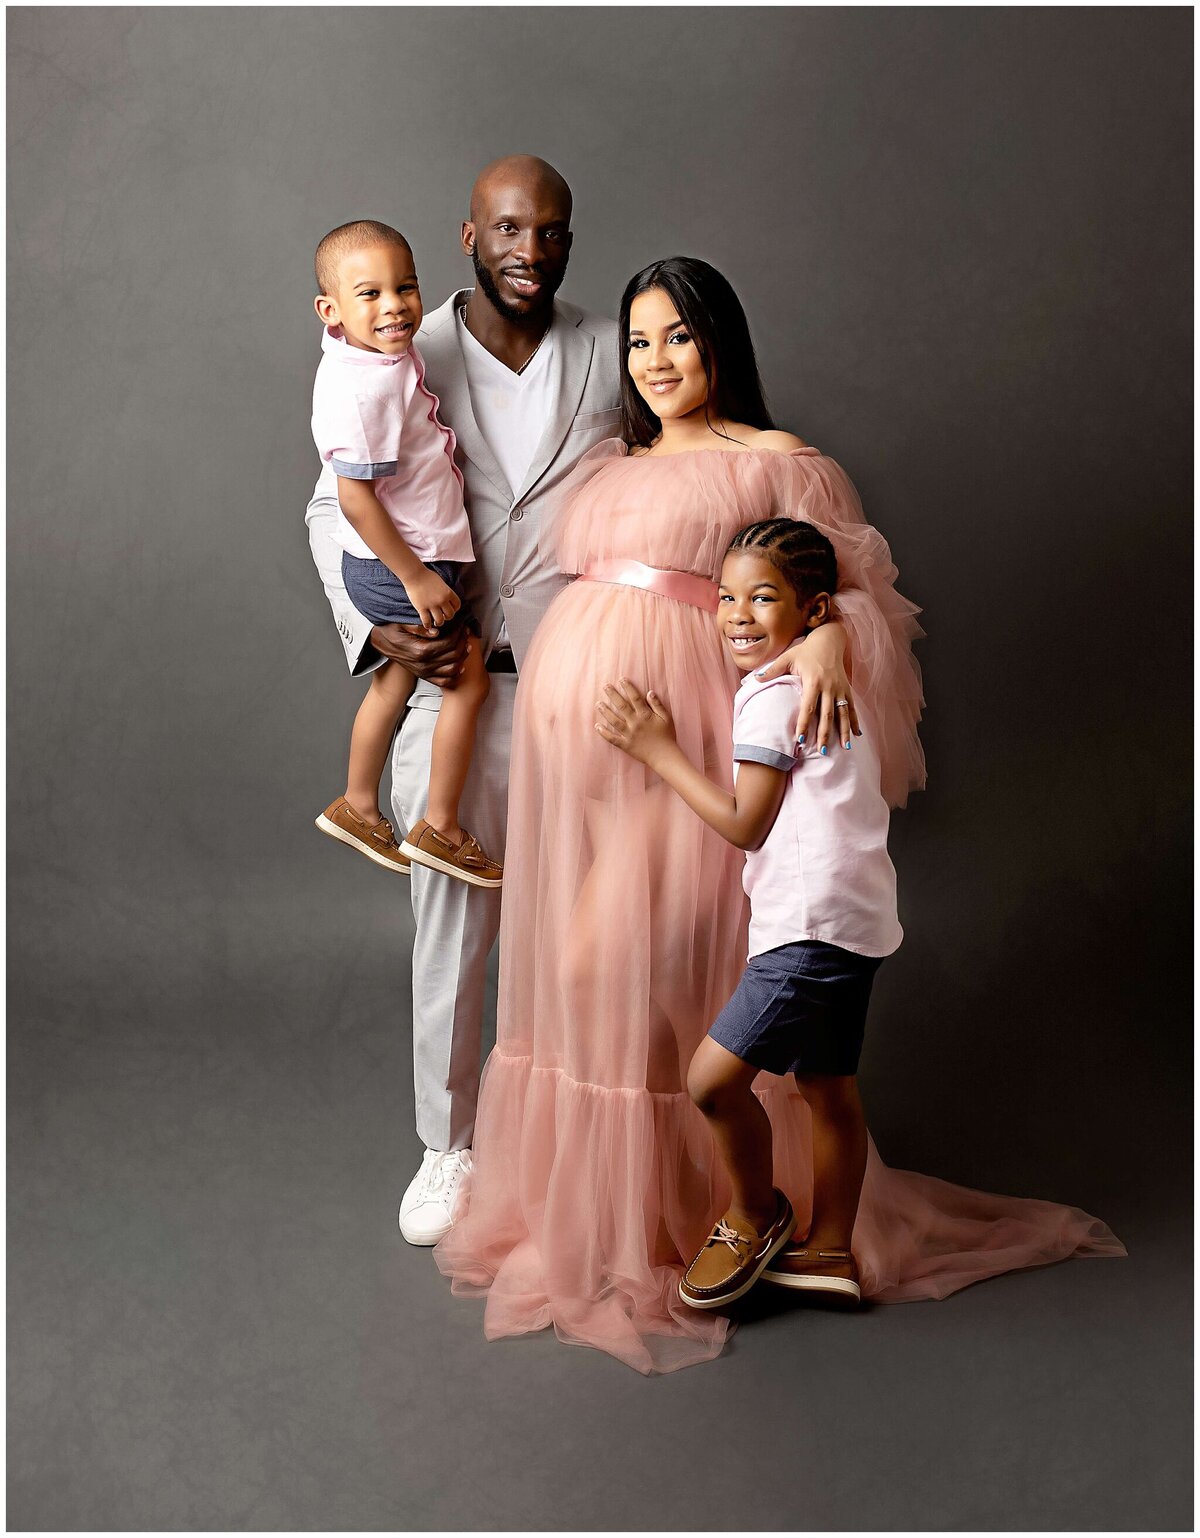 A family of four poses in studio for a pregnancy photoshoot, with the father holding up the younger child and the older child standing and hugging moms belly. The photo captures the anticipation and happiness of the growing family as they prepare to welcome a new addition.